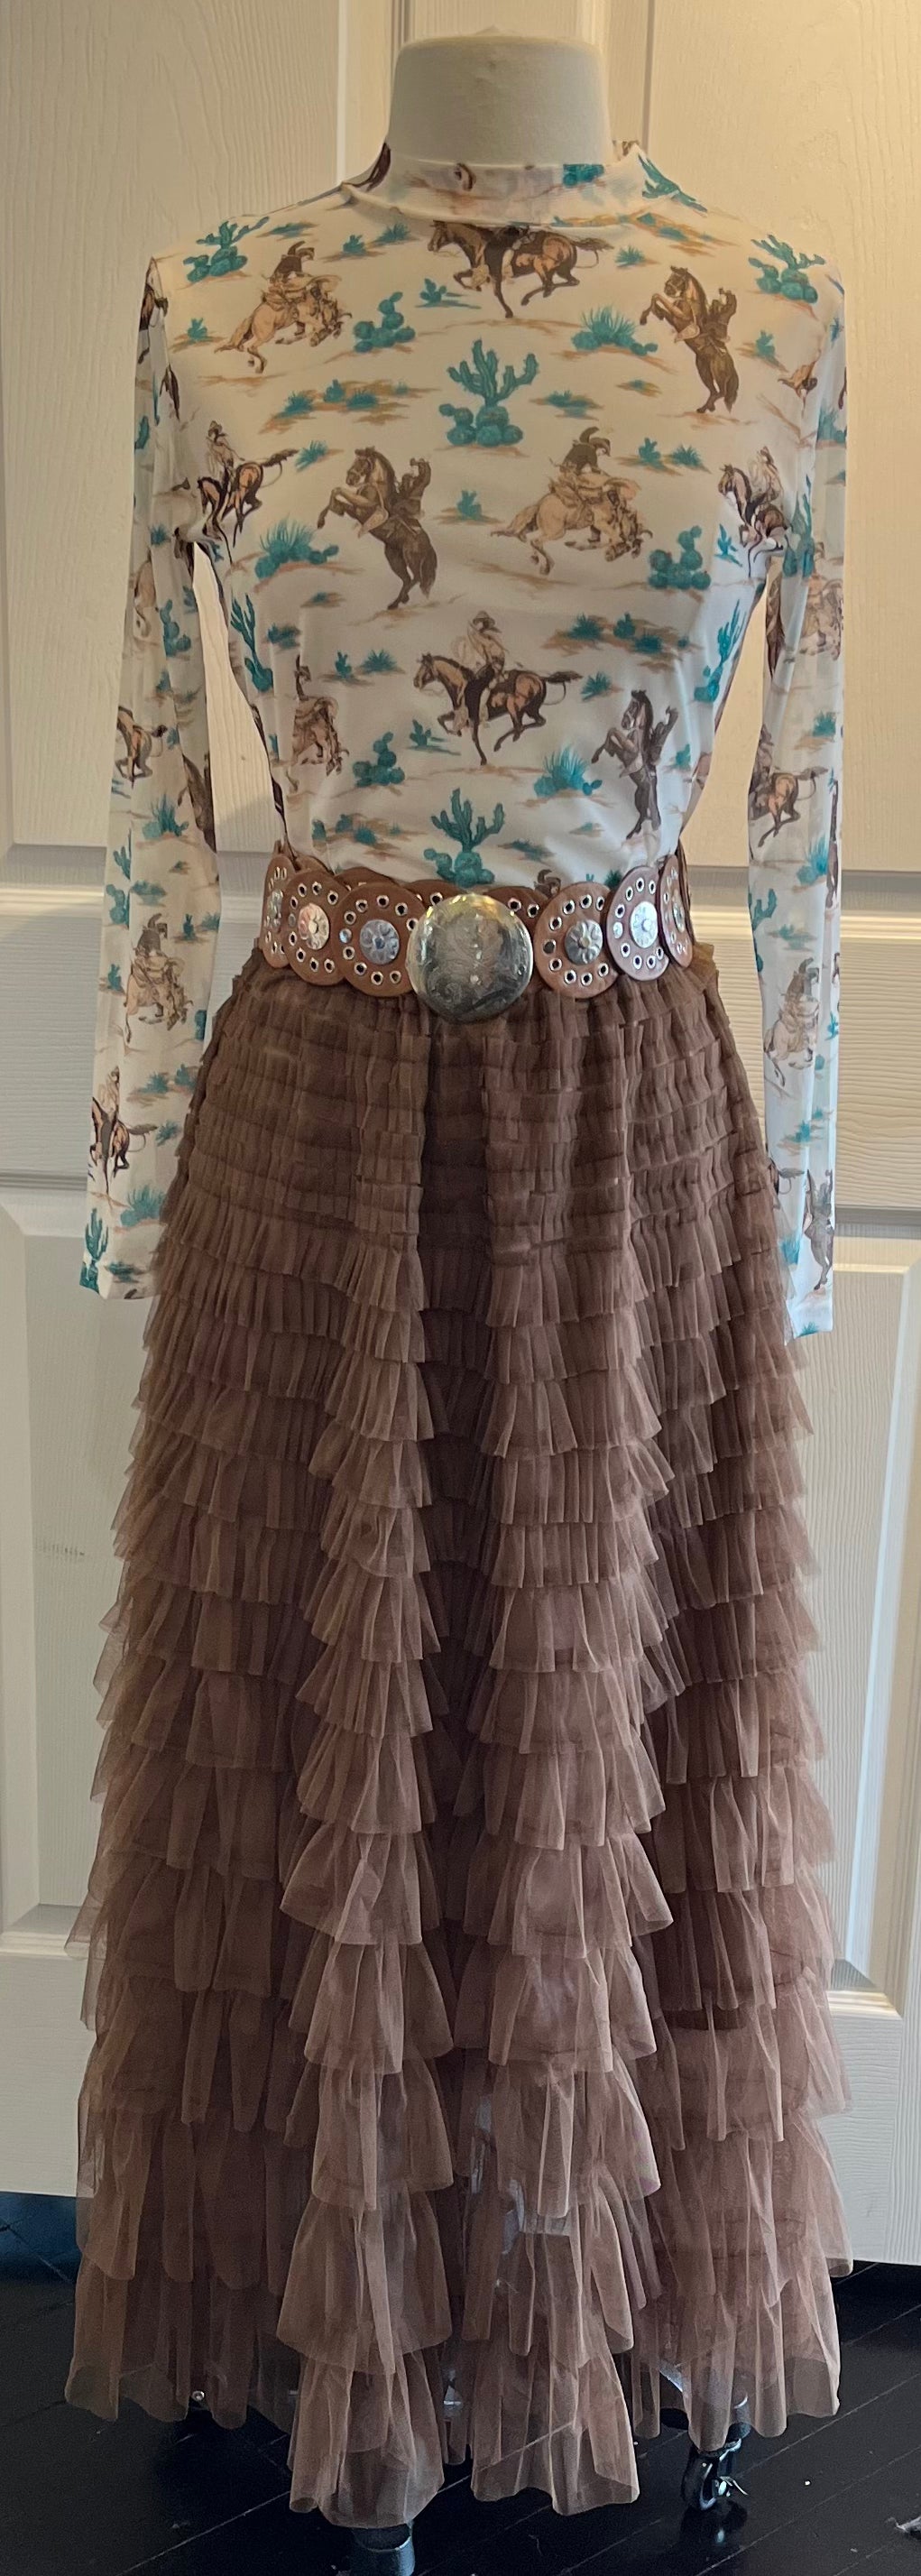 Brown Tiered Ankle Length Tulle Skirt